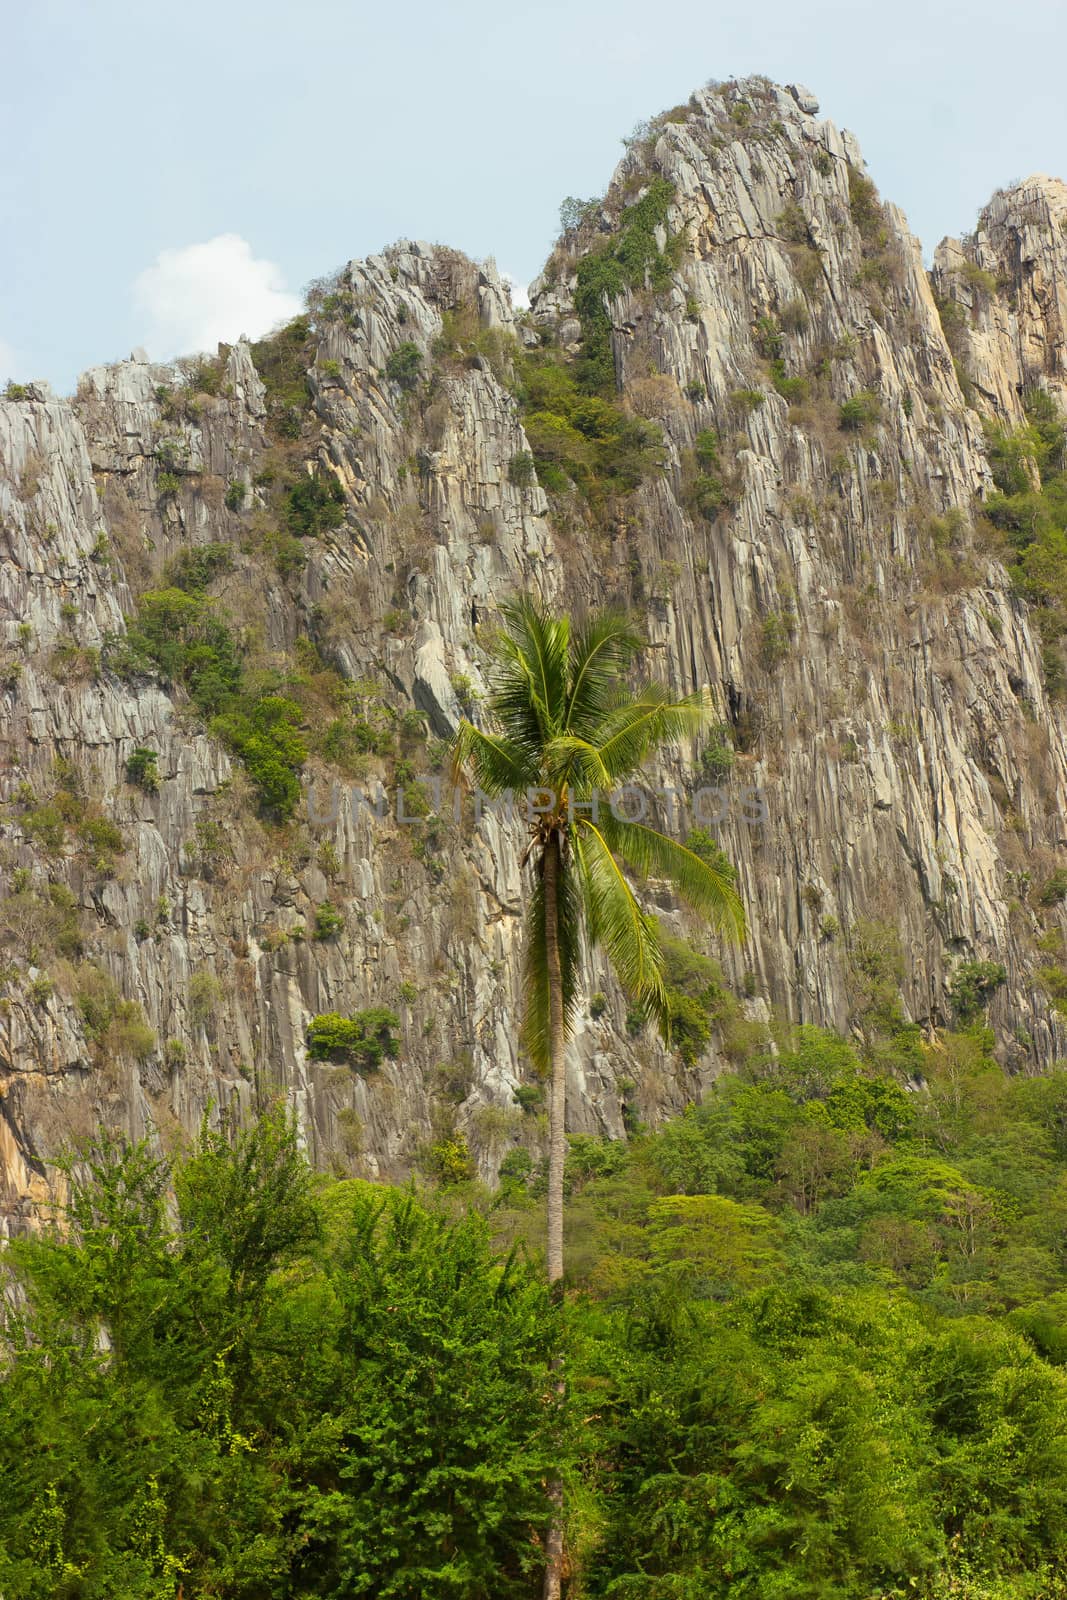 Mountains caused by the deposition of the rocks and the presence of bats.